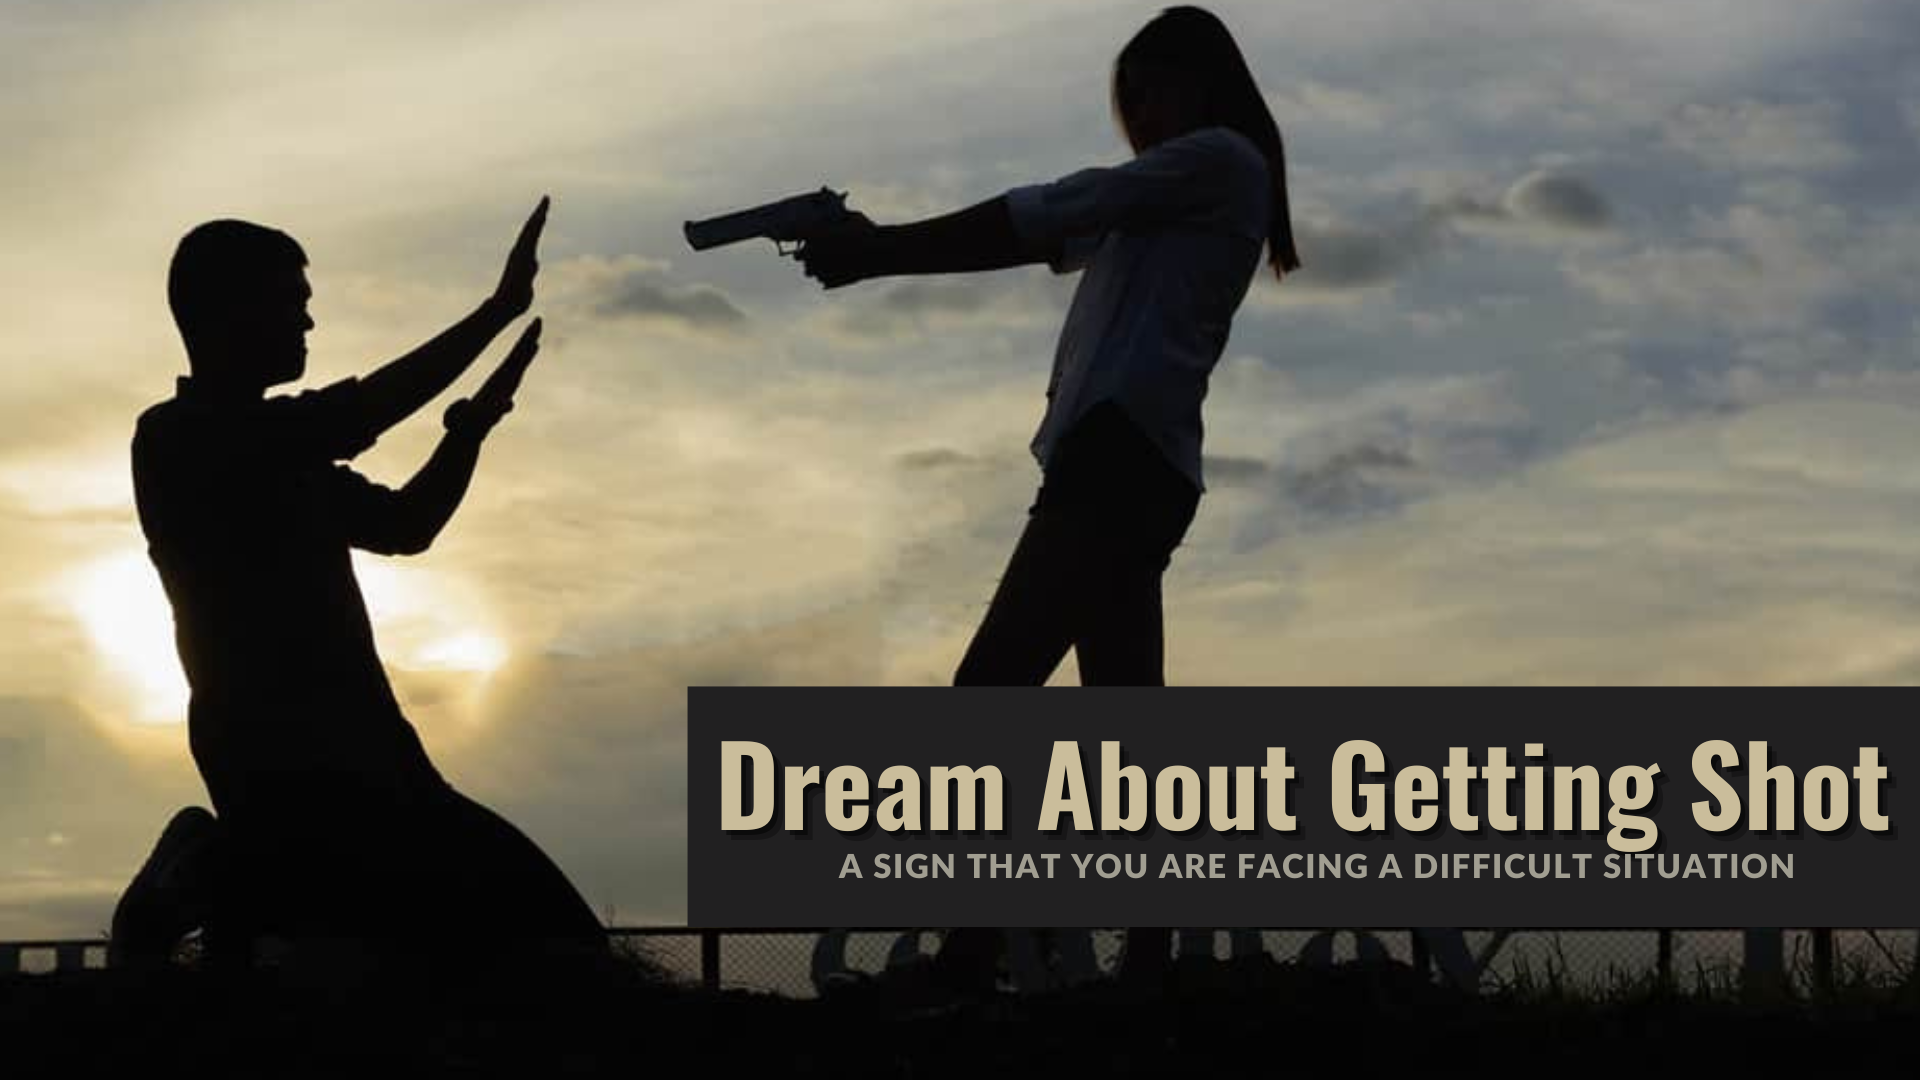 Dream About Getting Shot - A Sign That You Are Facing A Difficult Situation